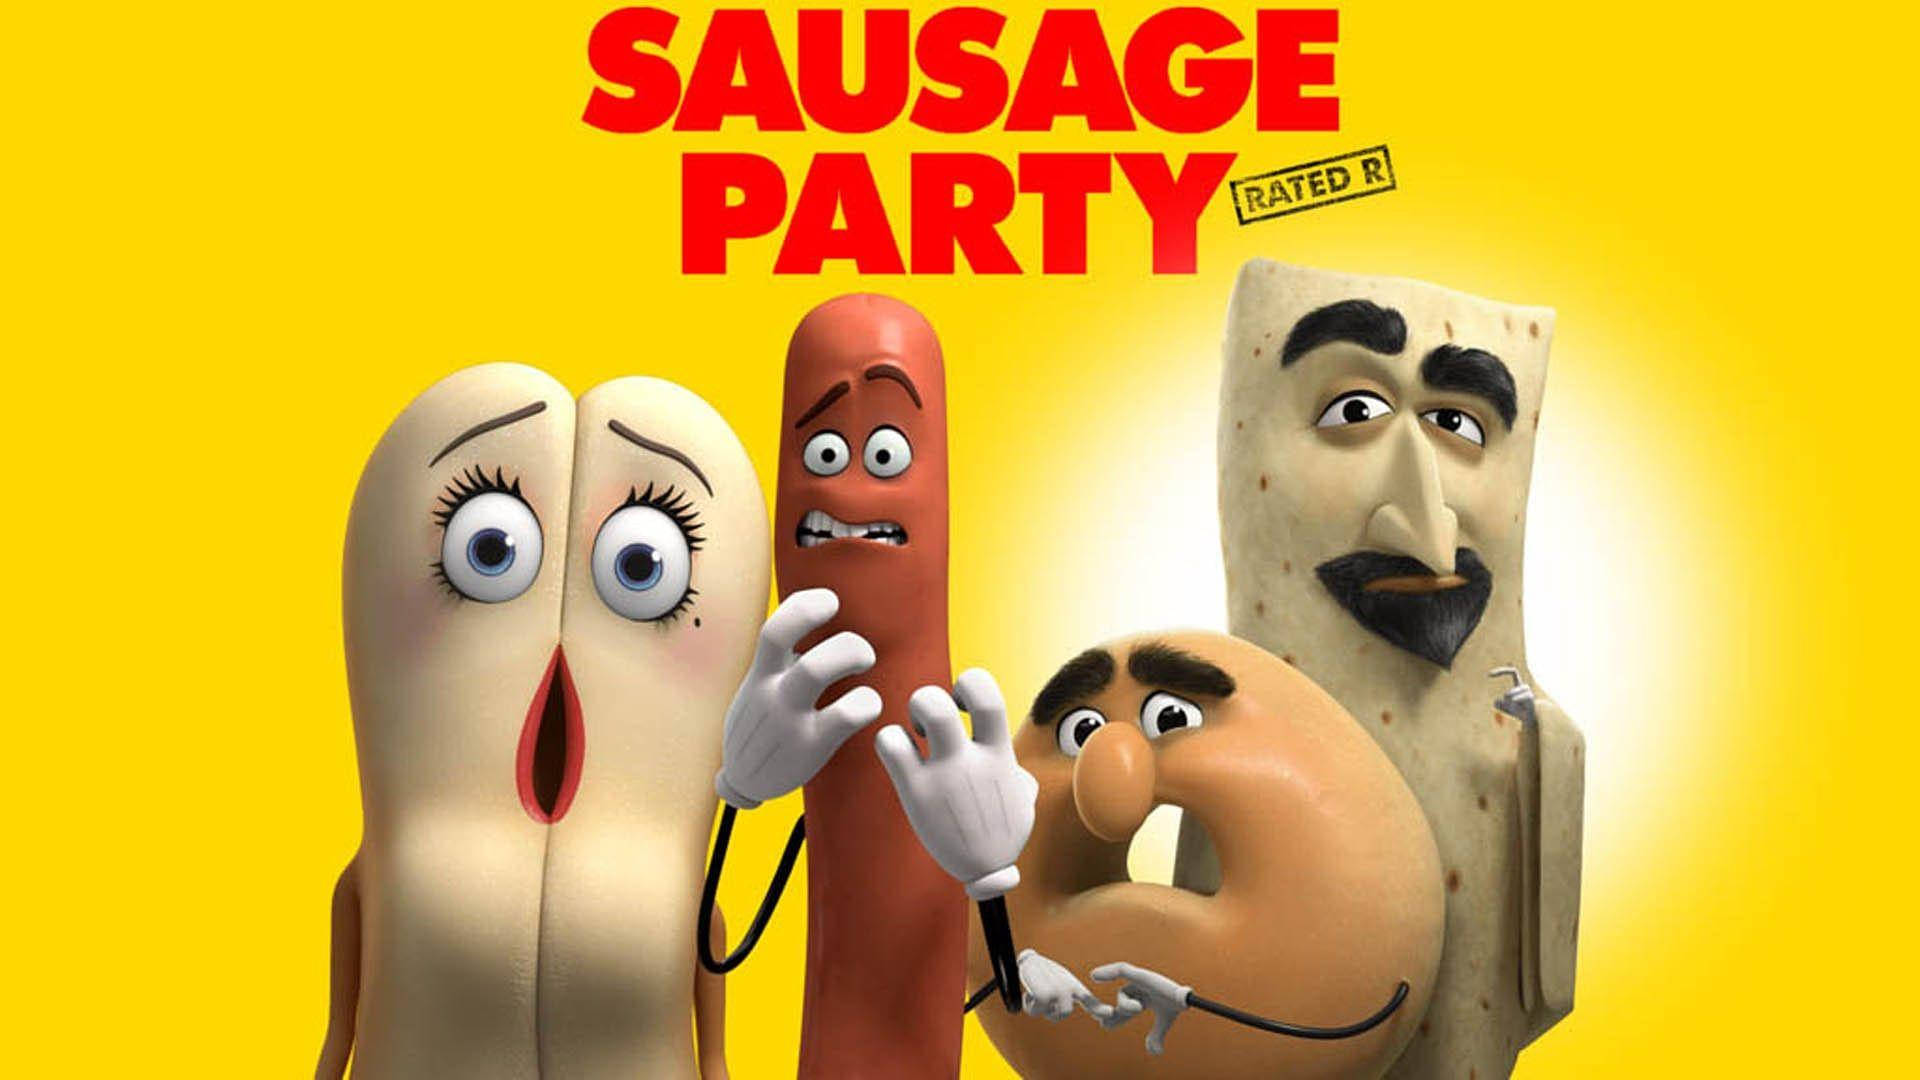 Sausage Party Background Wallpaper